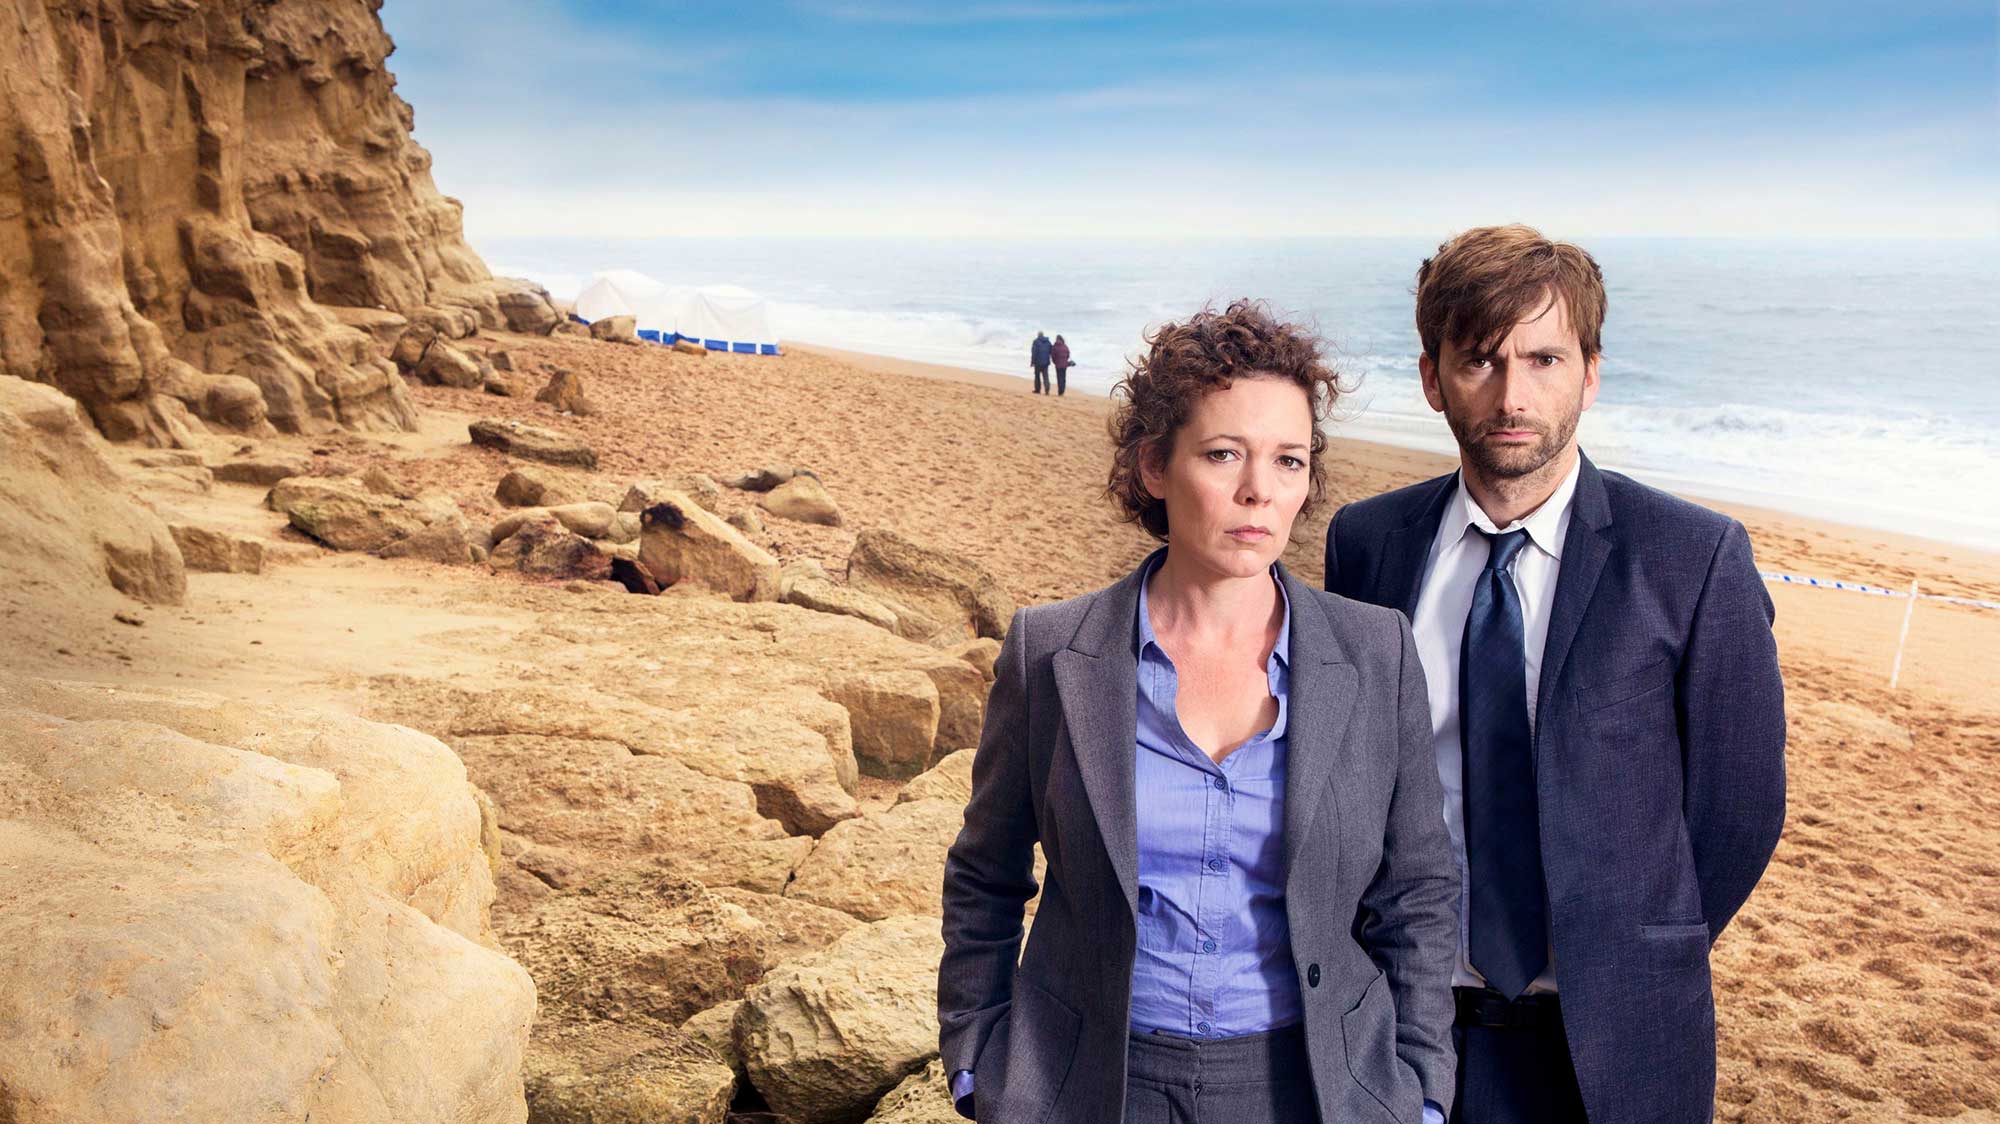 Broadchurch Location - Bridport and West Bay